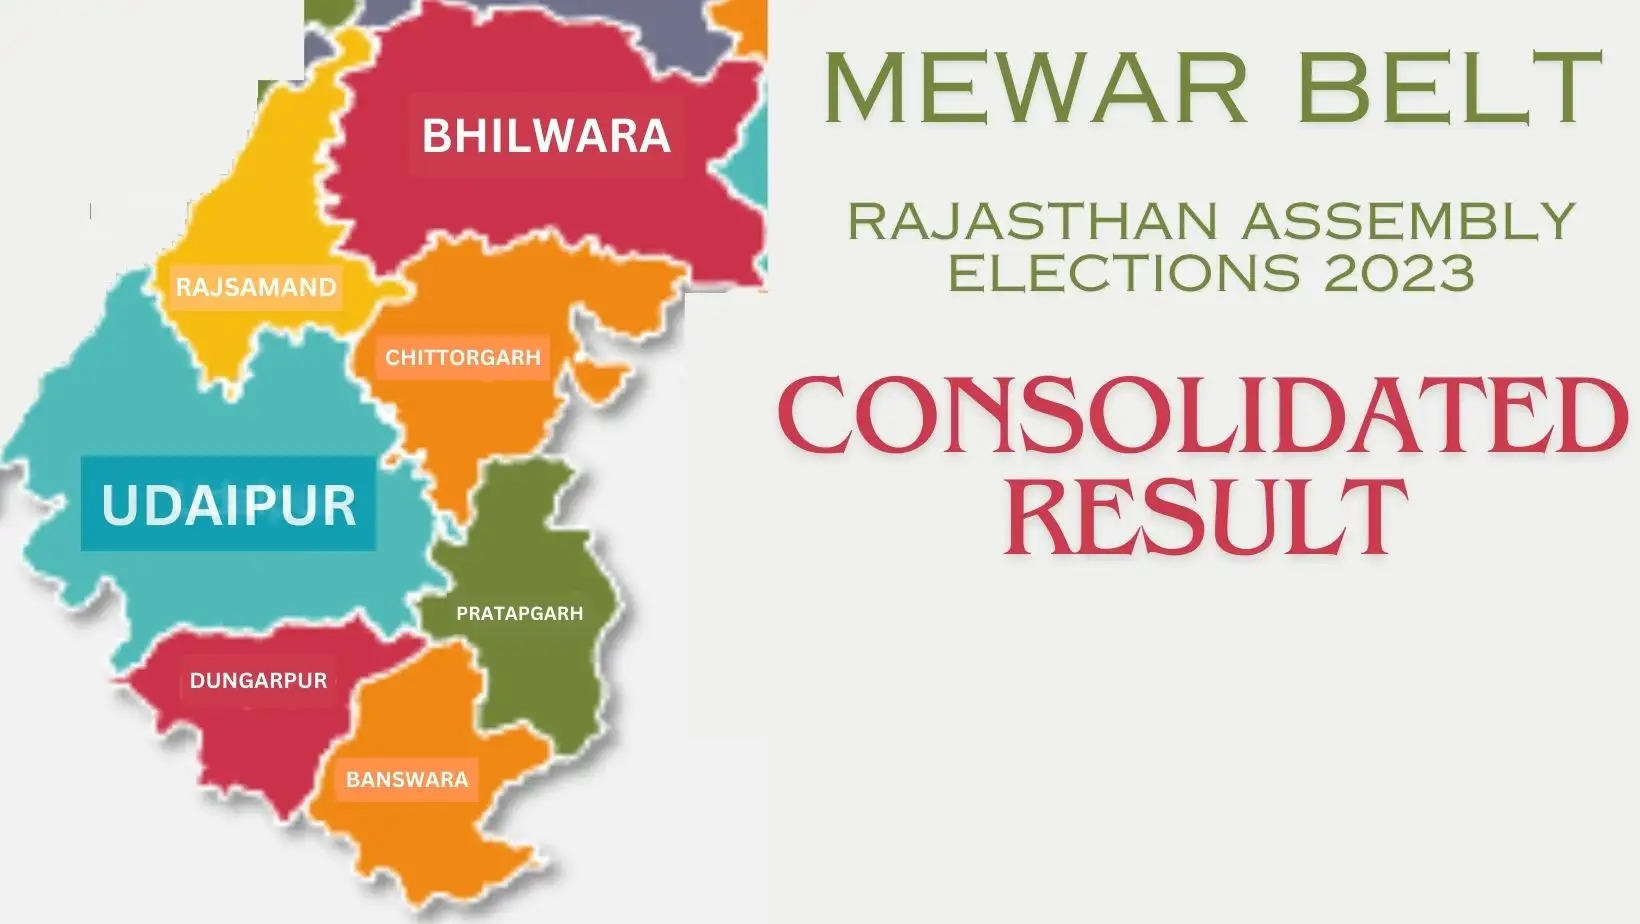 Independent Candidates captured two major seats in the Mewar belt of Rajasthan, viz. Chittaurgarh and Bhilwara, while three candidates from the Bharat Adivasi Party succeeded with resounding victories in Dungarpur and Pratapgarh.